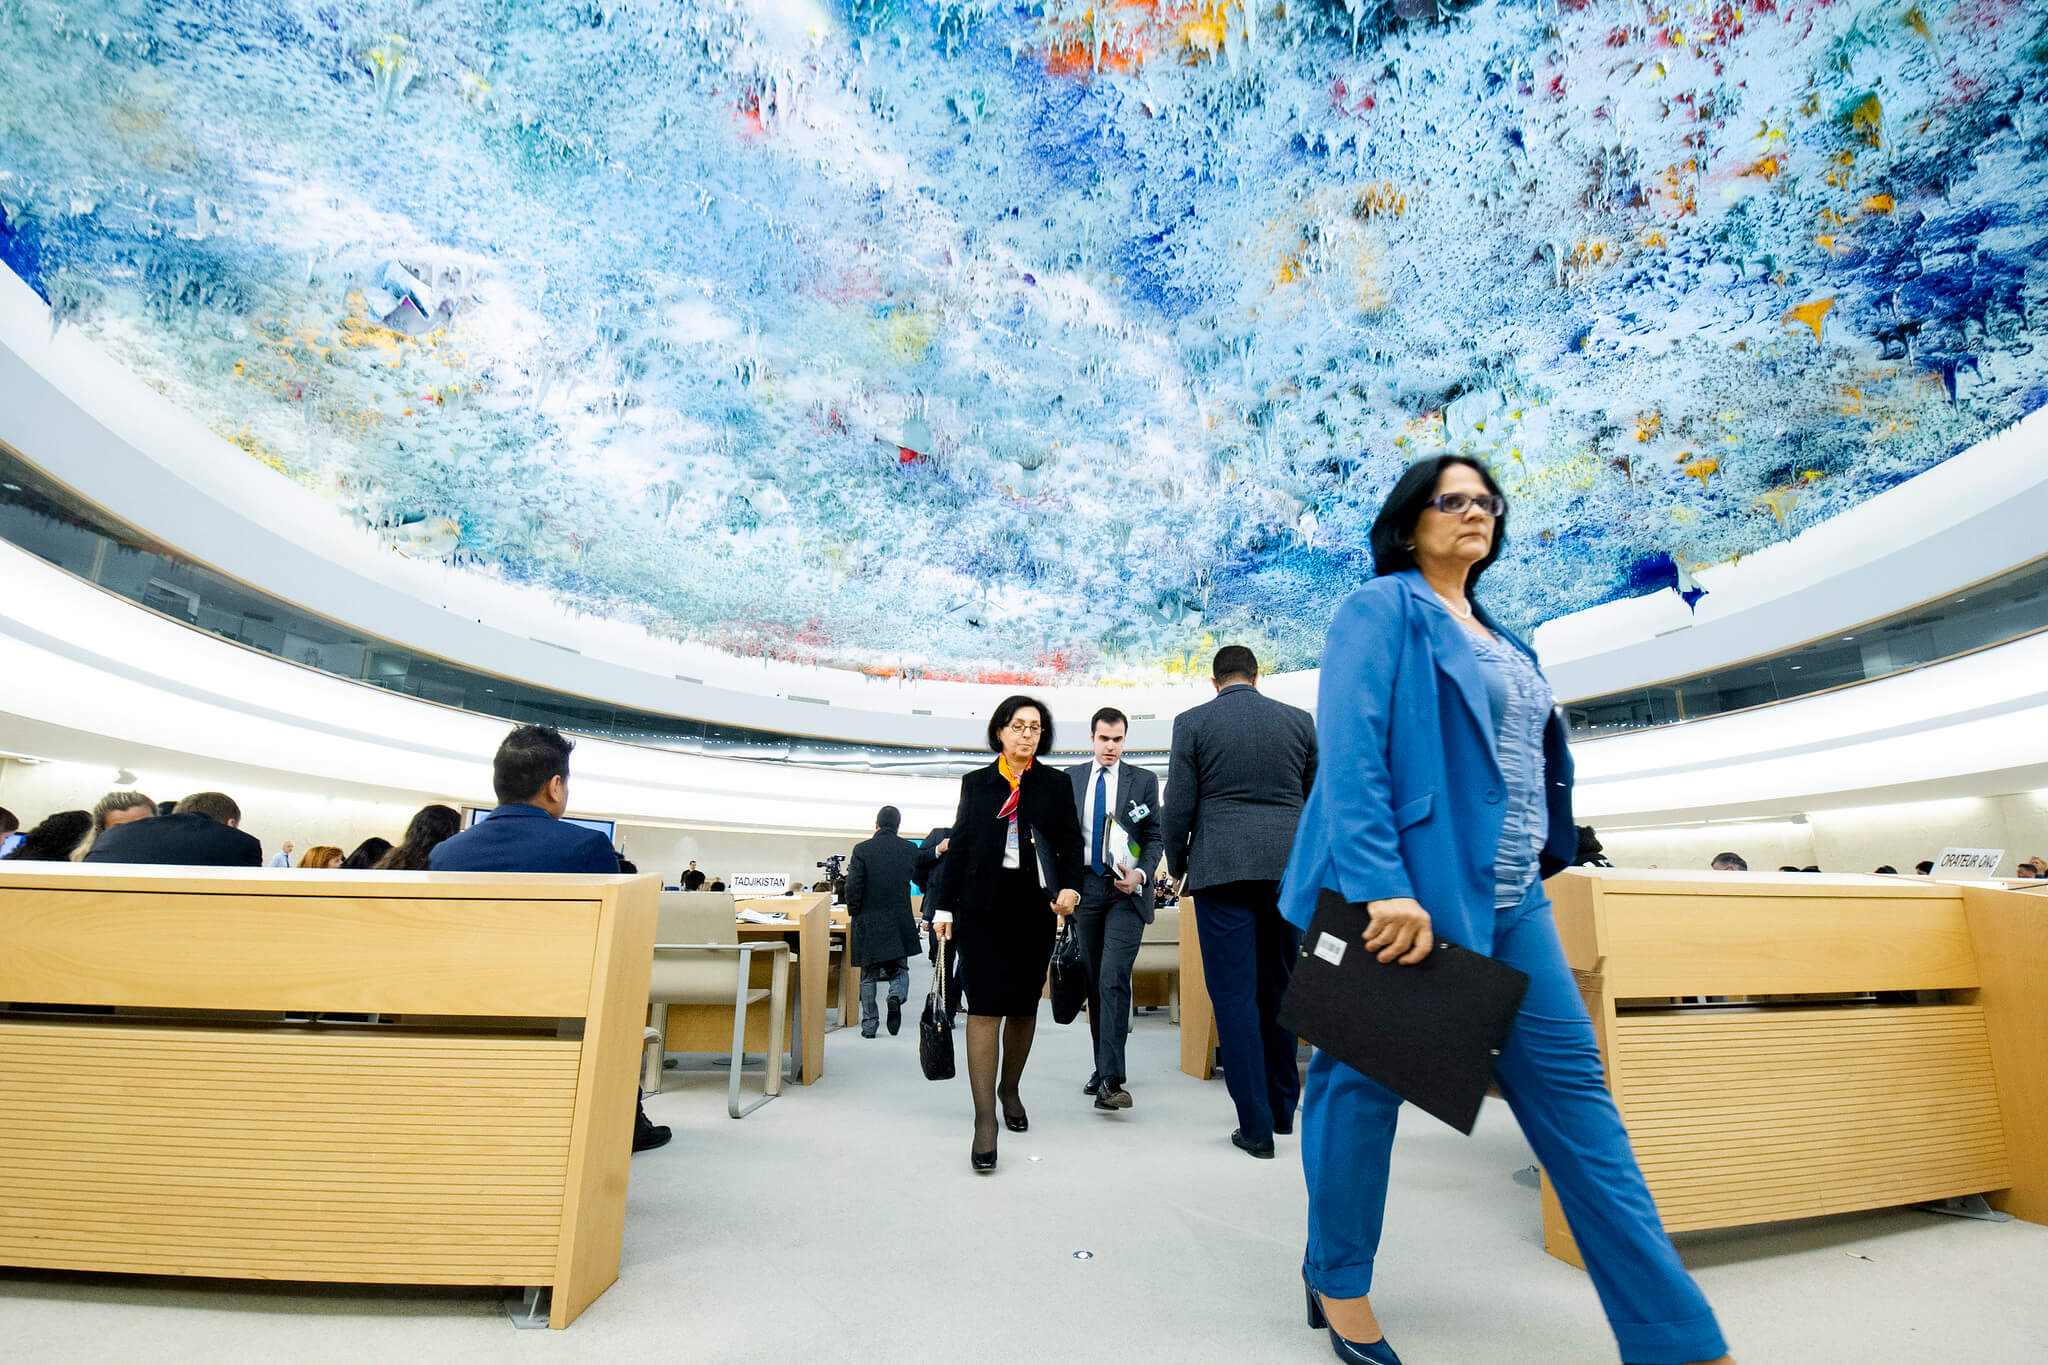 Delegates leave the room during the speech of Jorge Arreaza Montserrat, Minister of People’s Power for Foreign Affairs of Venezuela, Human Rights Council. 25 February 2020